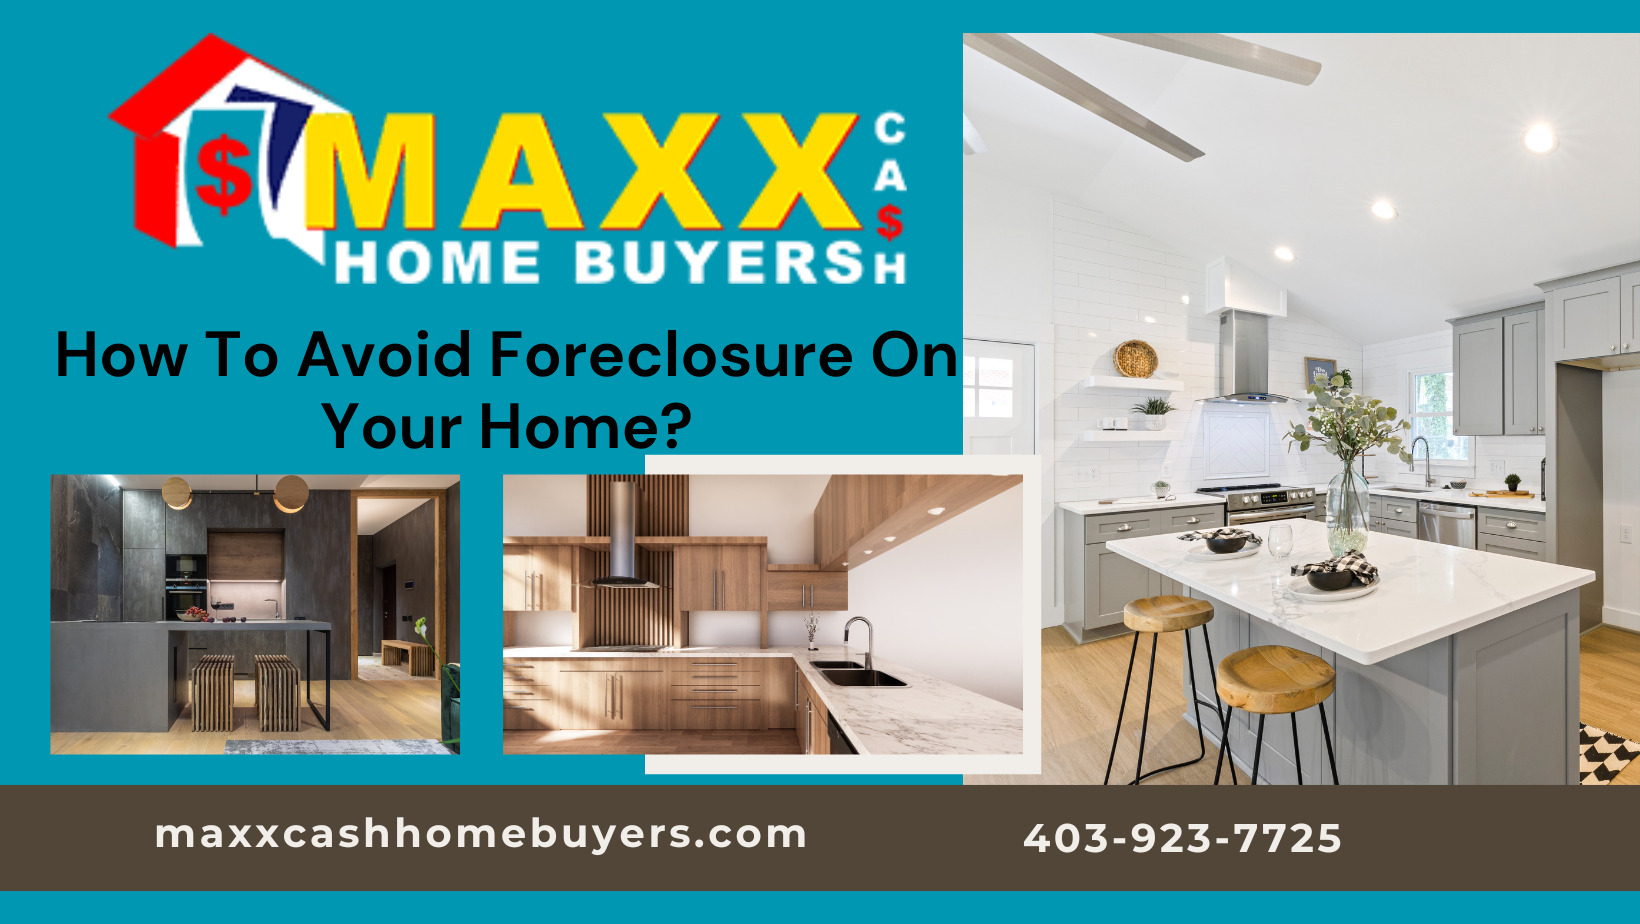 How To Avoid Foreclosure On Your Home? Avoiding Foreclosure